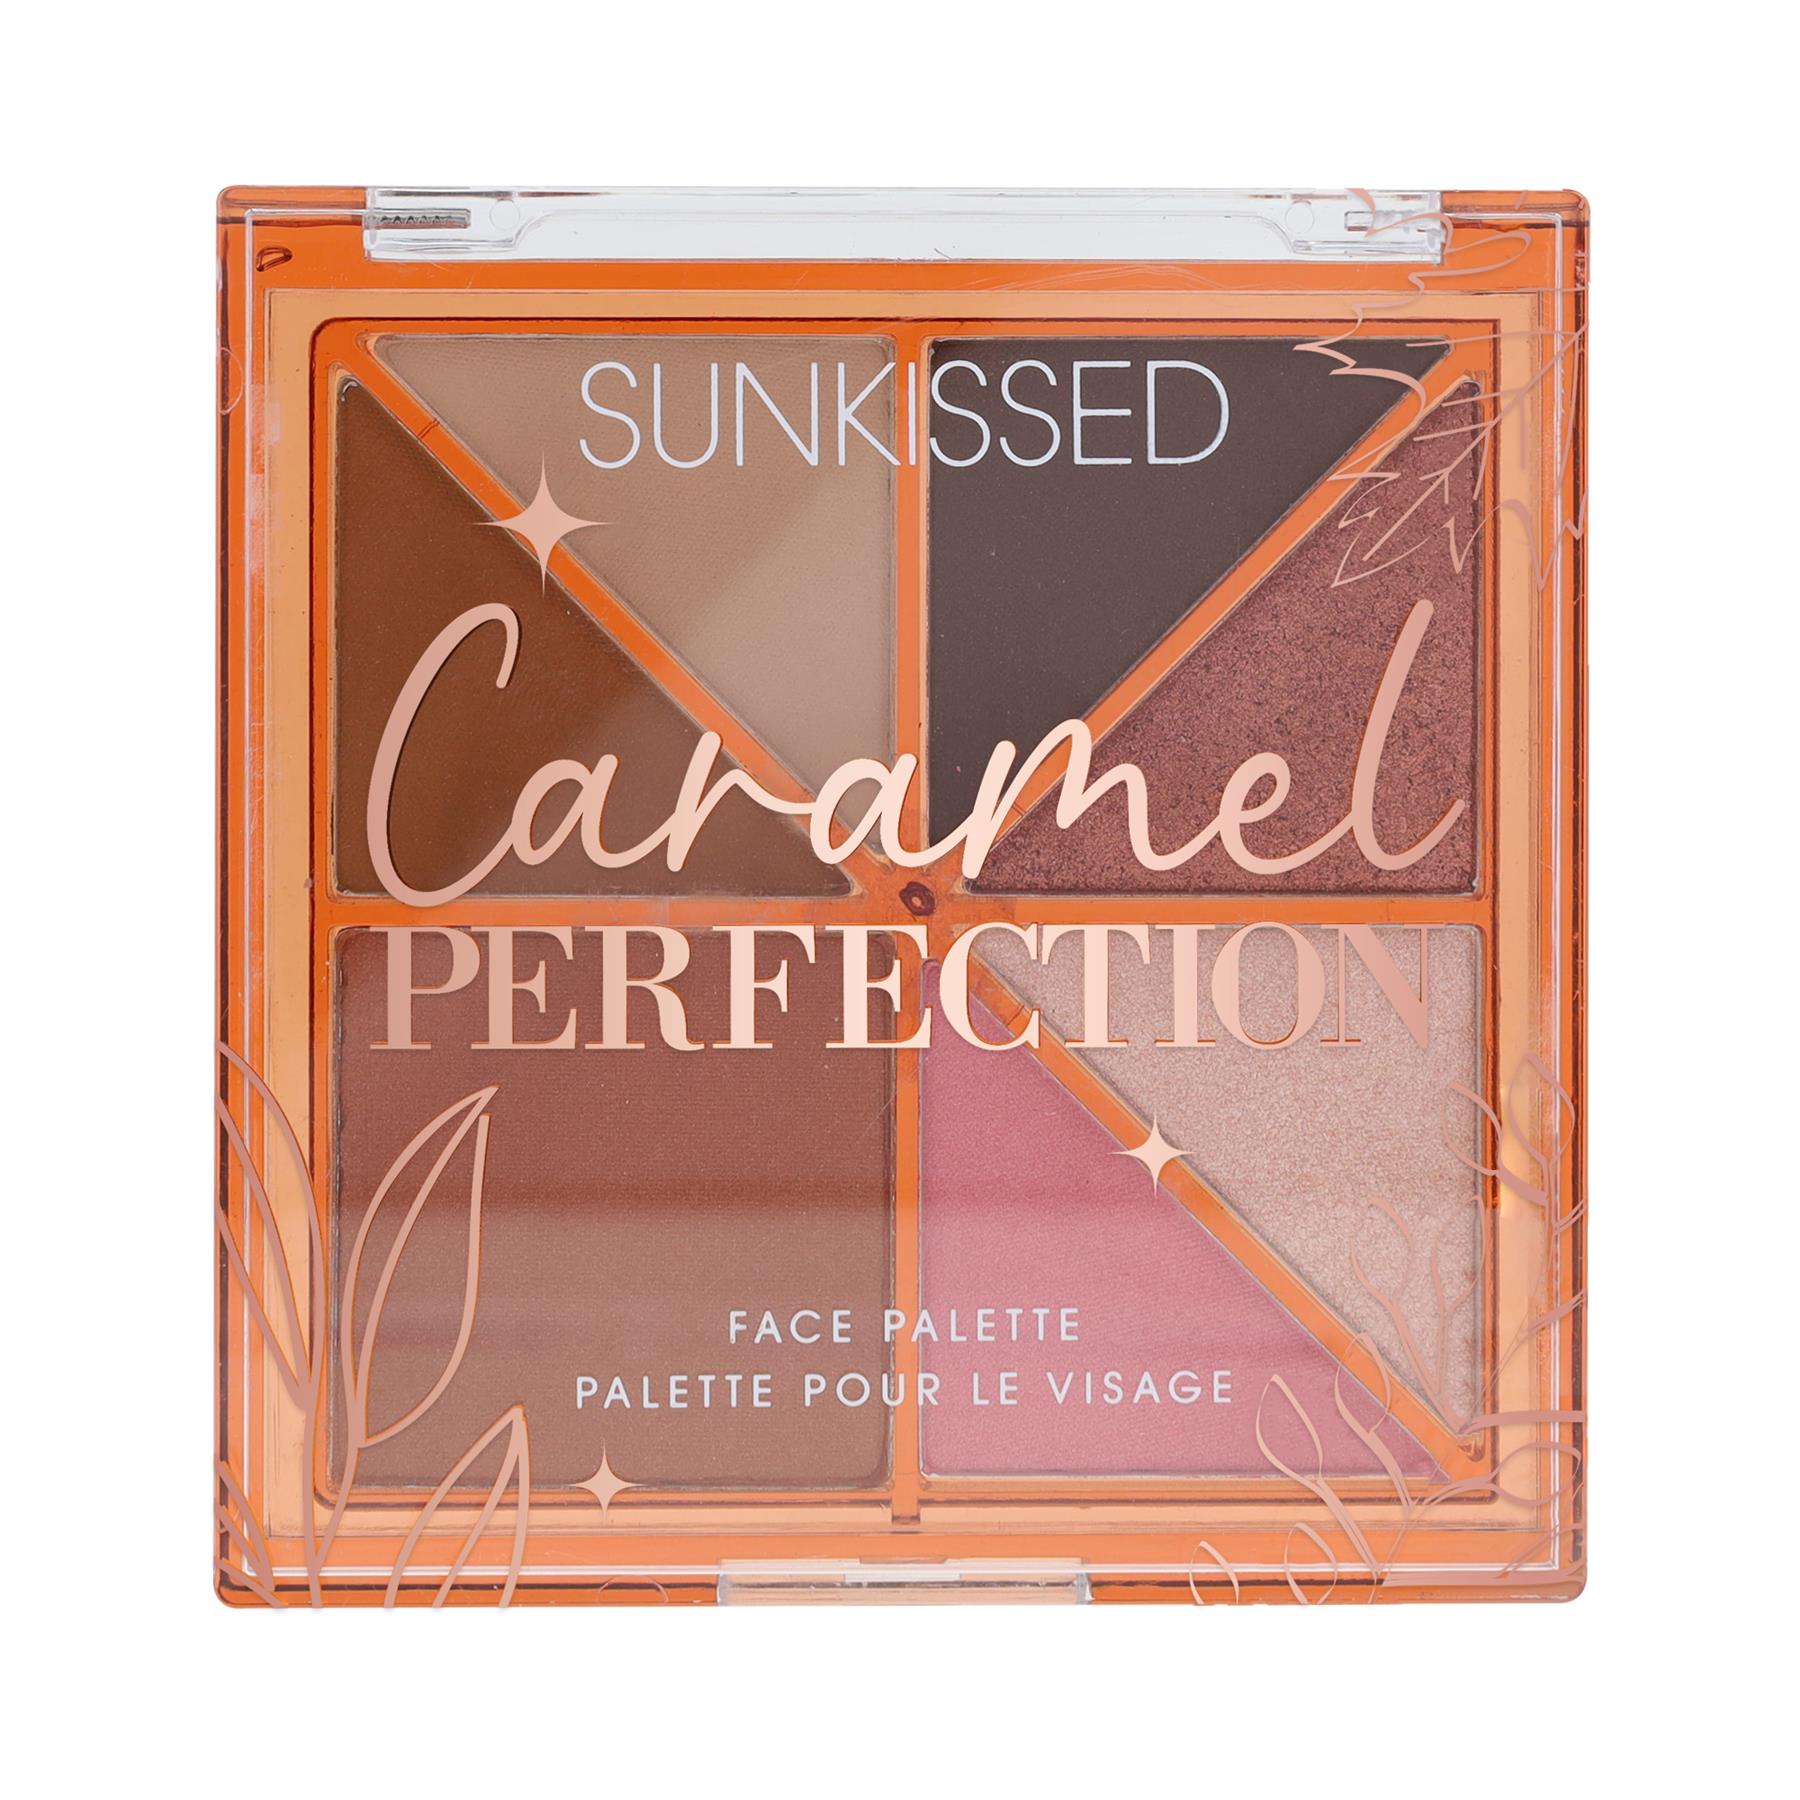 Sunkissed Caramel Perfection Face Palette - Bronzer, Blusher, Highlighter, Eyeshadow from Perfume Plus Direct